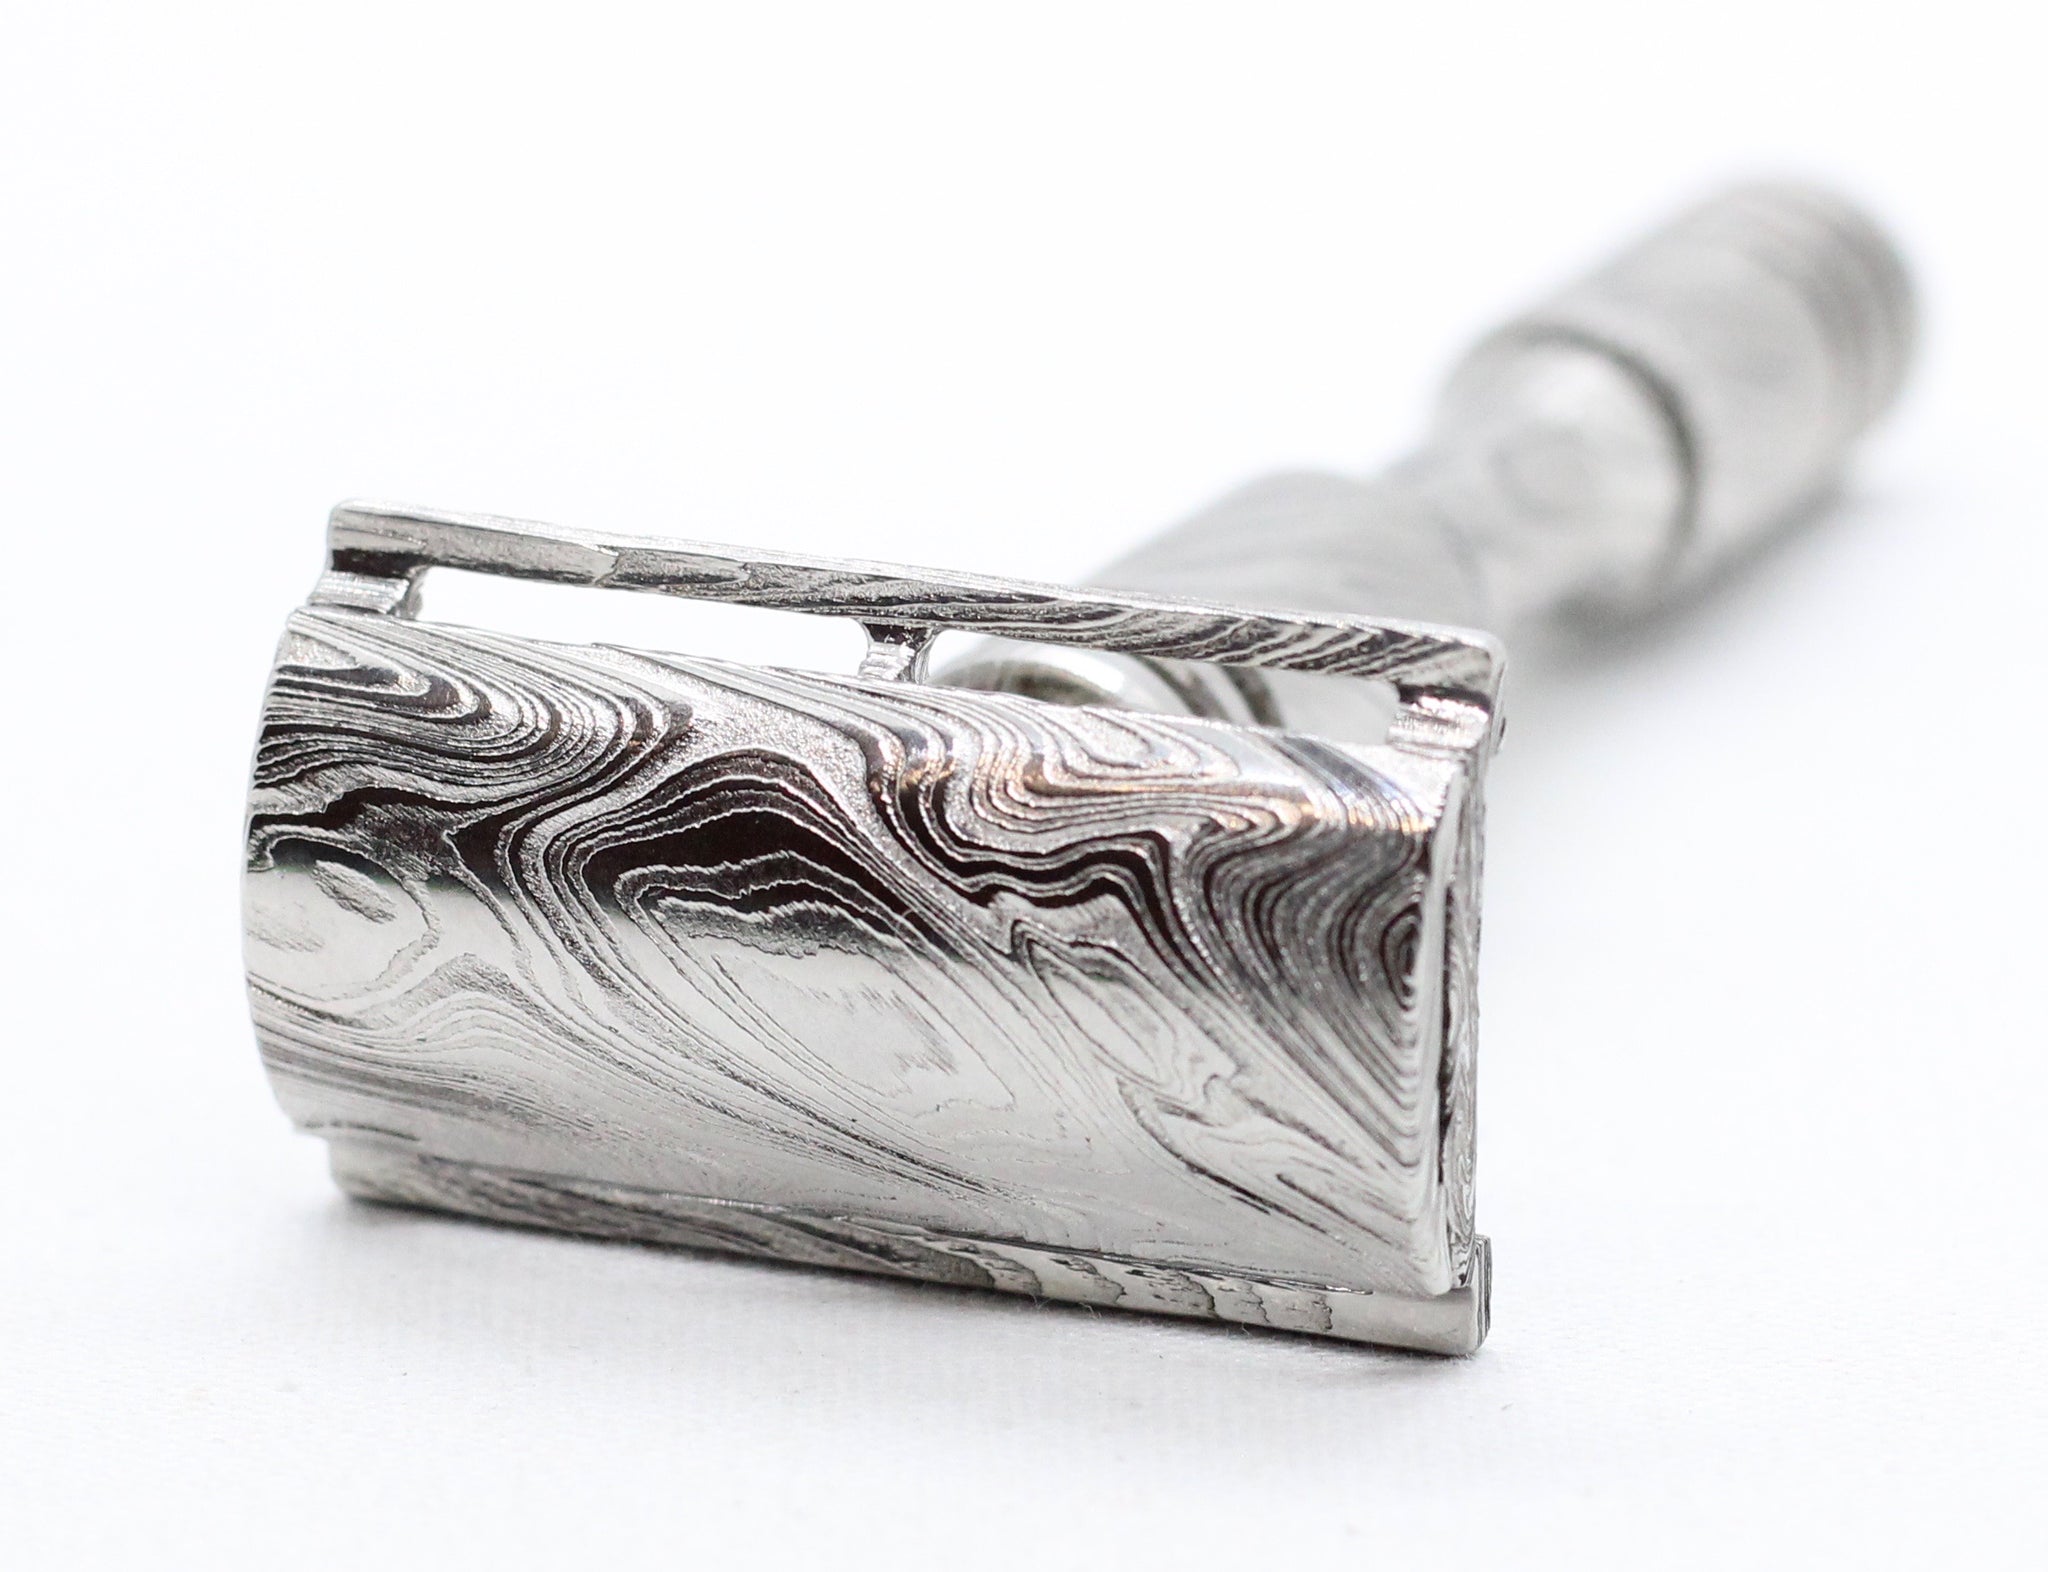 Acid etched damascus steel - Stainless steel Damascus with twist pattern single edge razor a double edge safety razor for wet shaving polished grade 304 and 316 - custom forged in the USA - luxury high end safety razor to reduce ingrown hairs and irritation - for a smooth shave